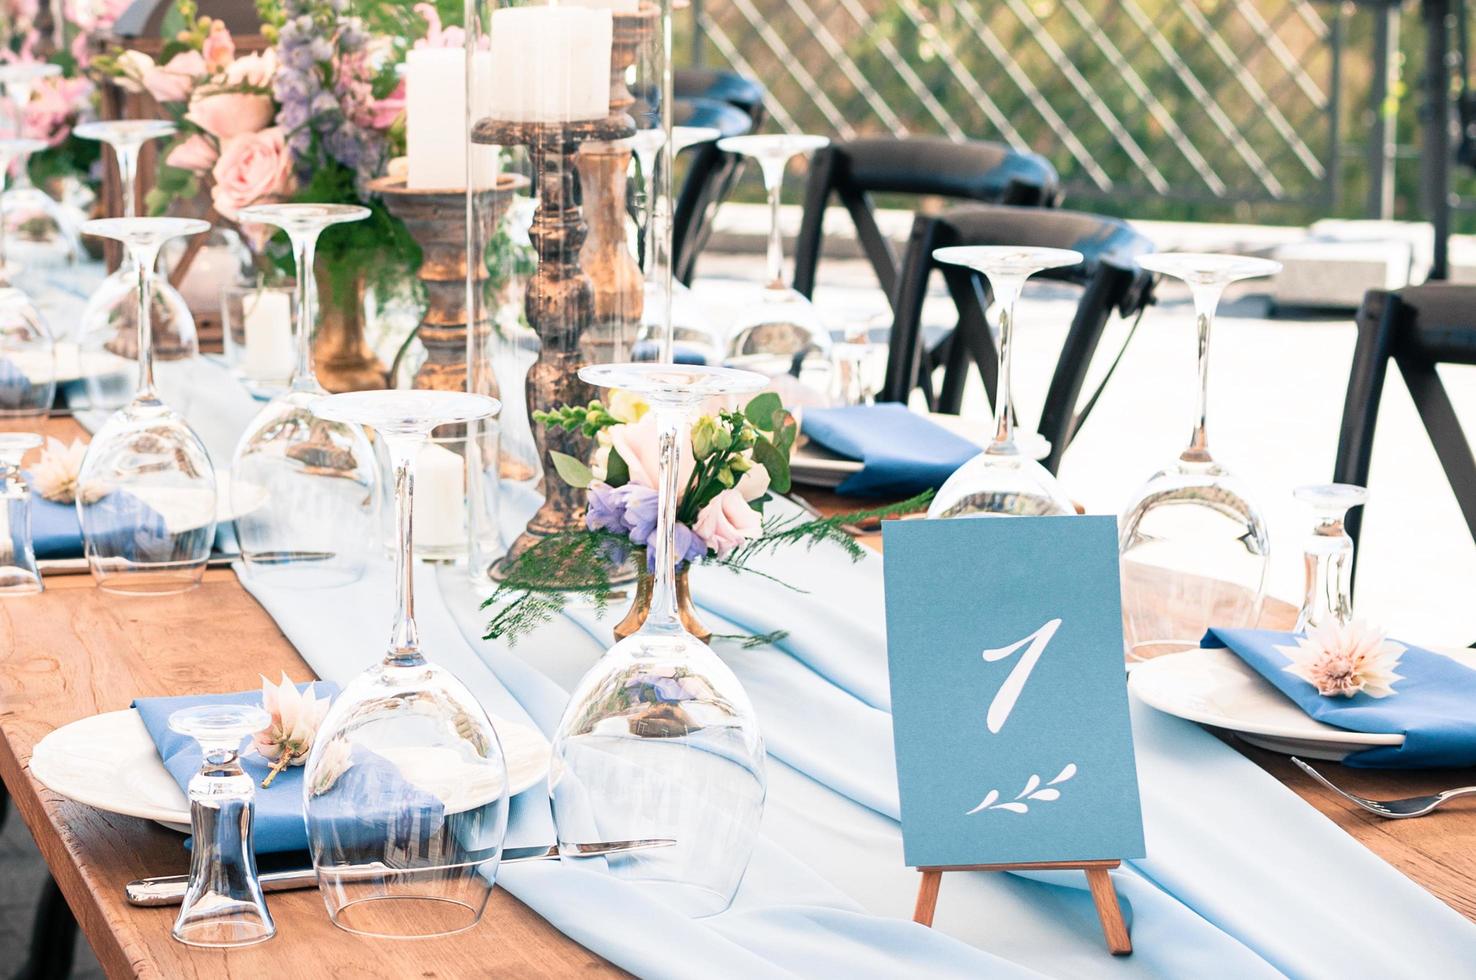 Event decoration table setup, lue elements, summer time, outdoors photo